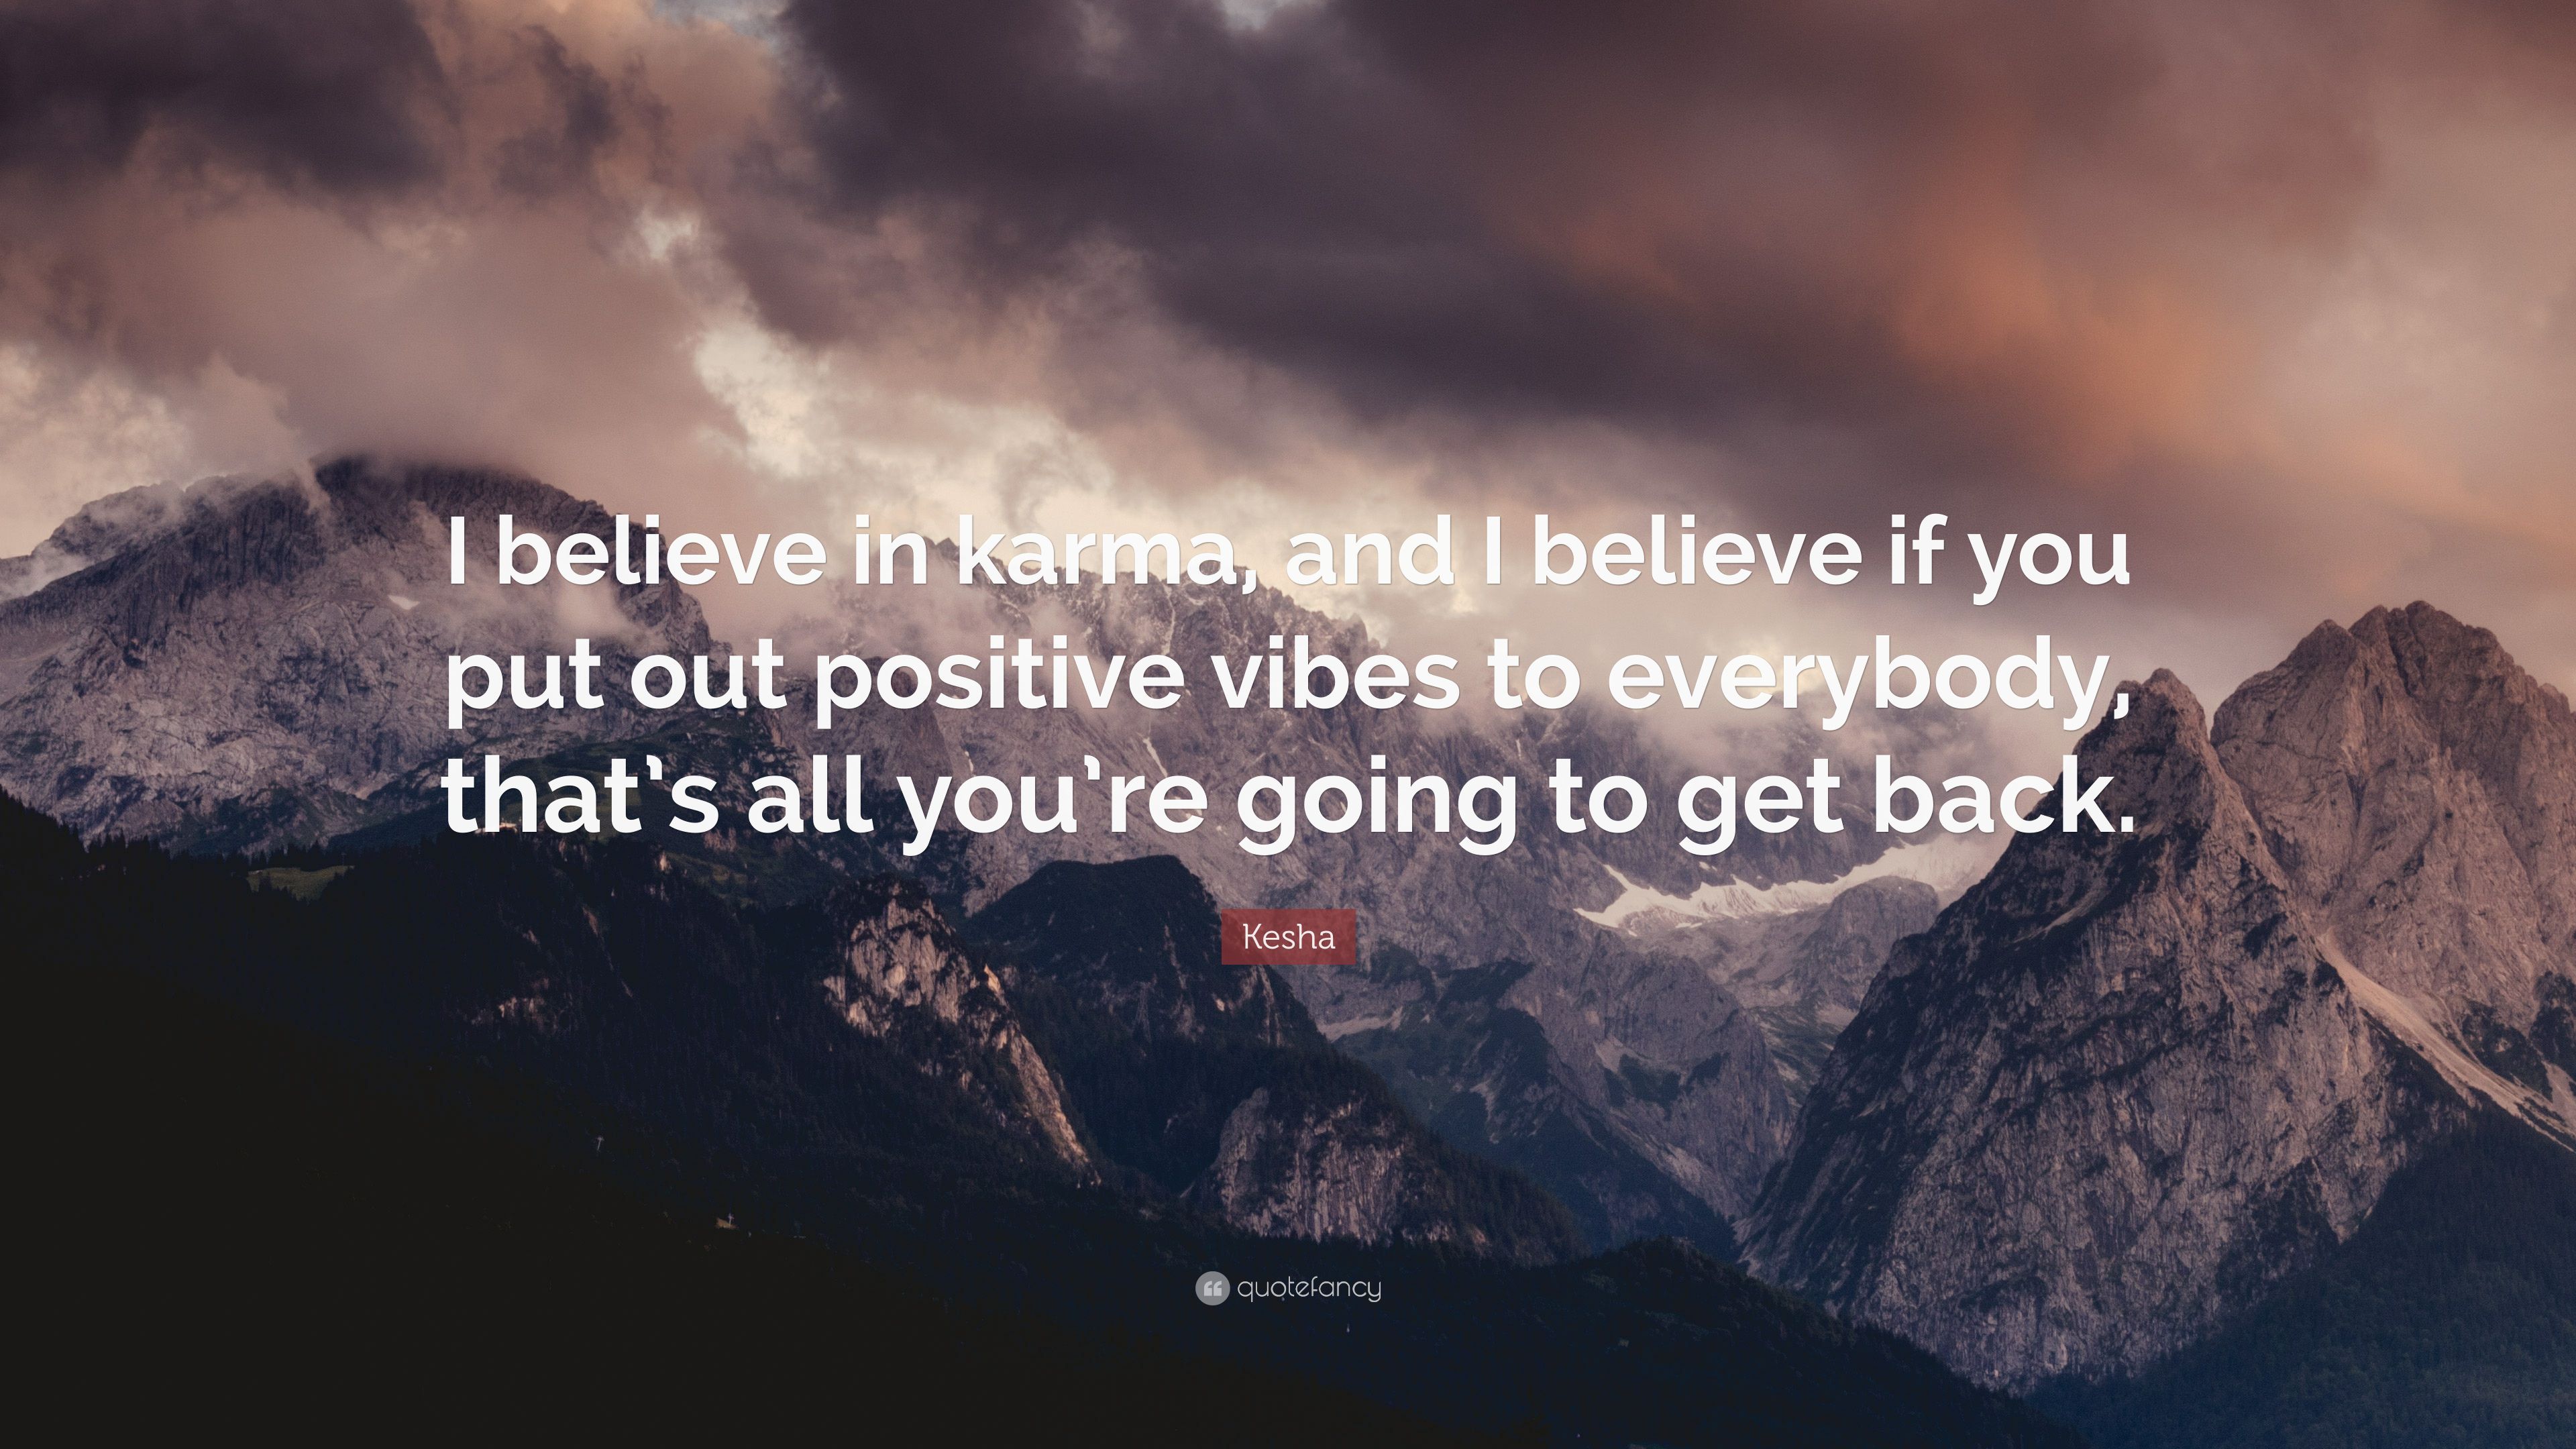 Kesha Quote: “I believe in karma, and I believe if you put out